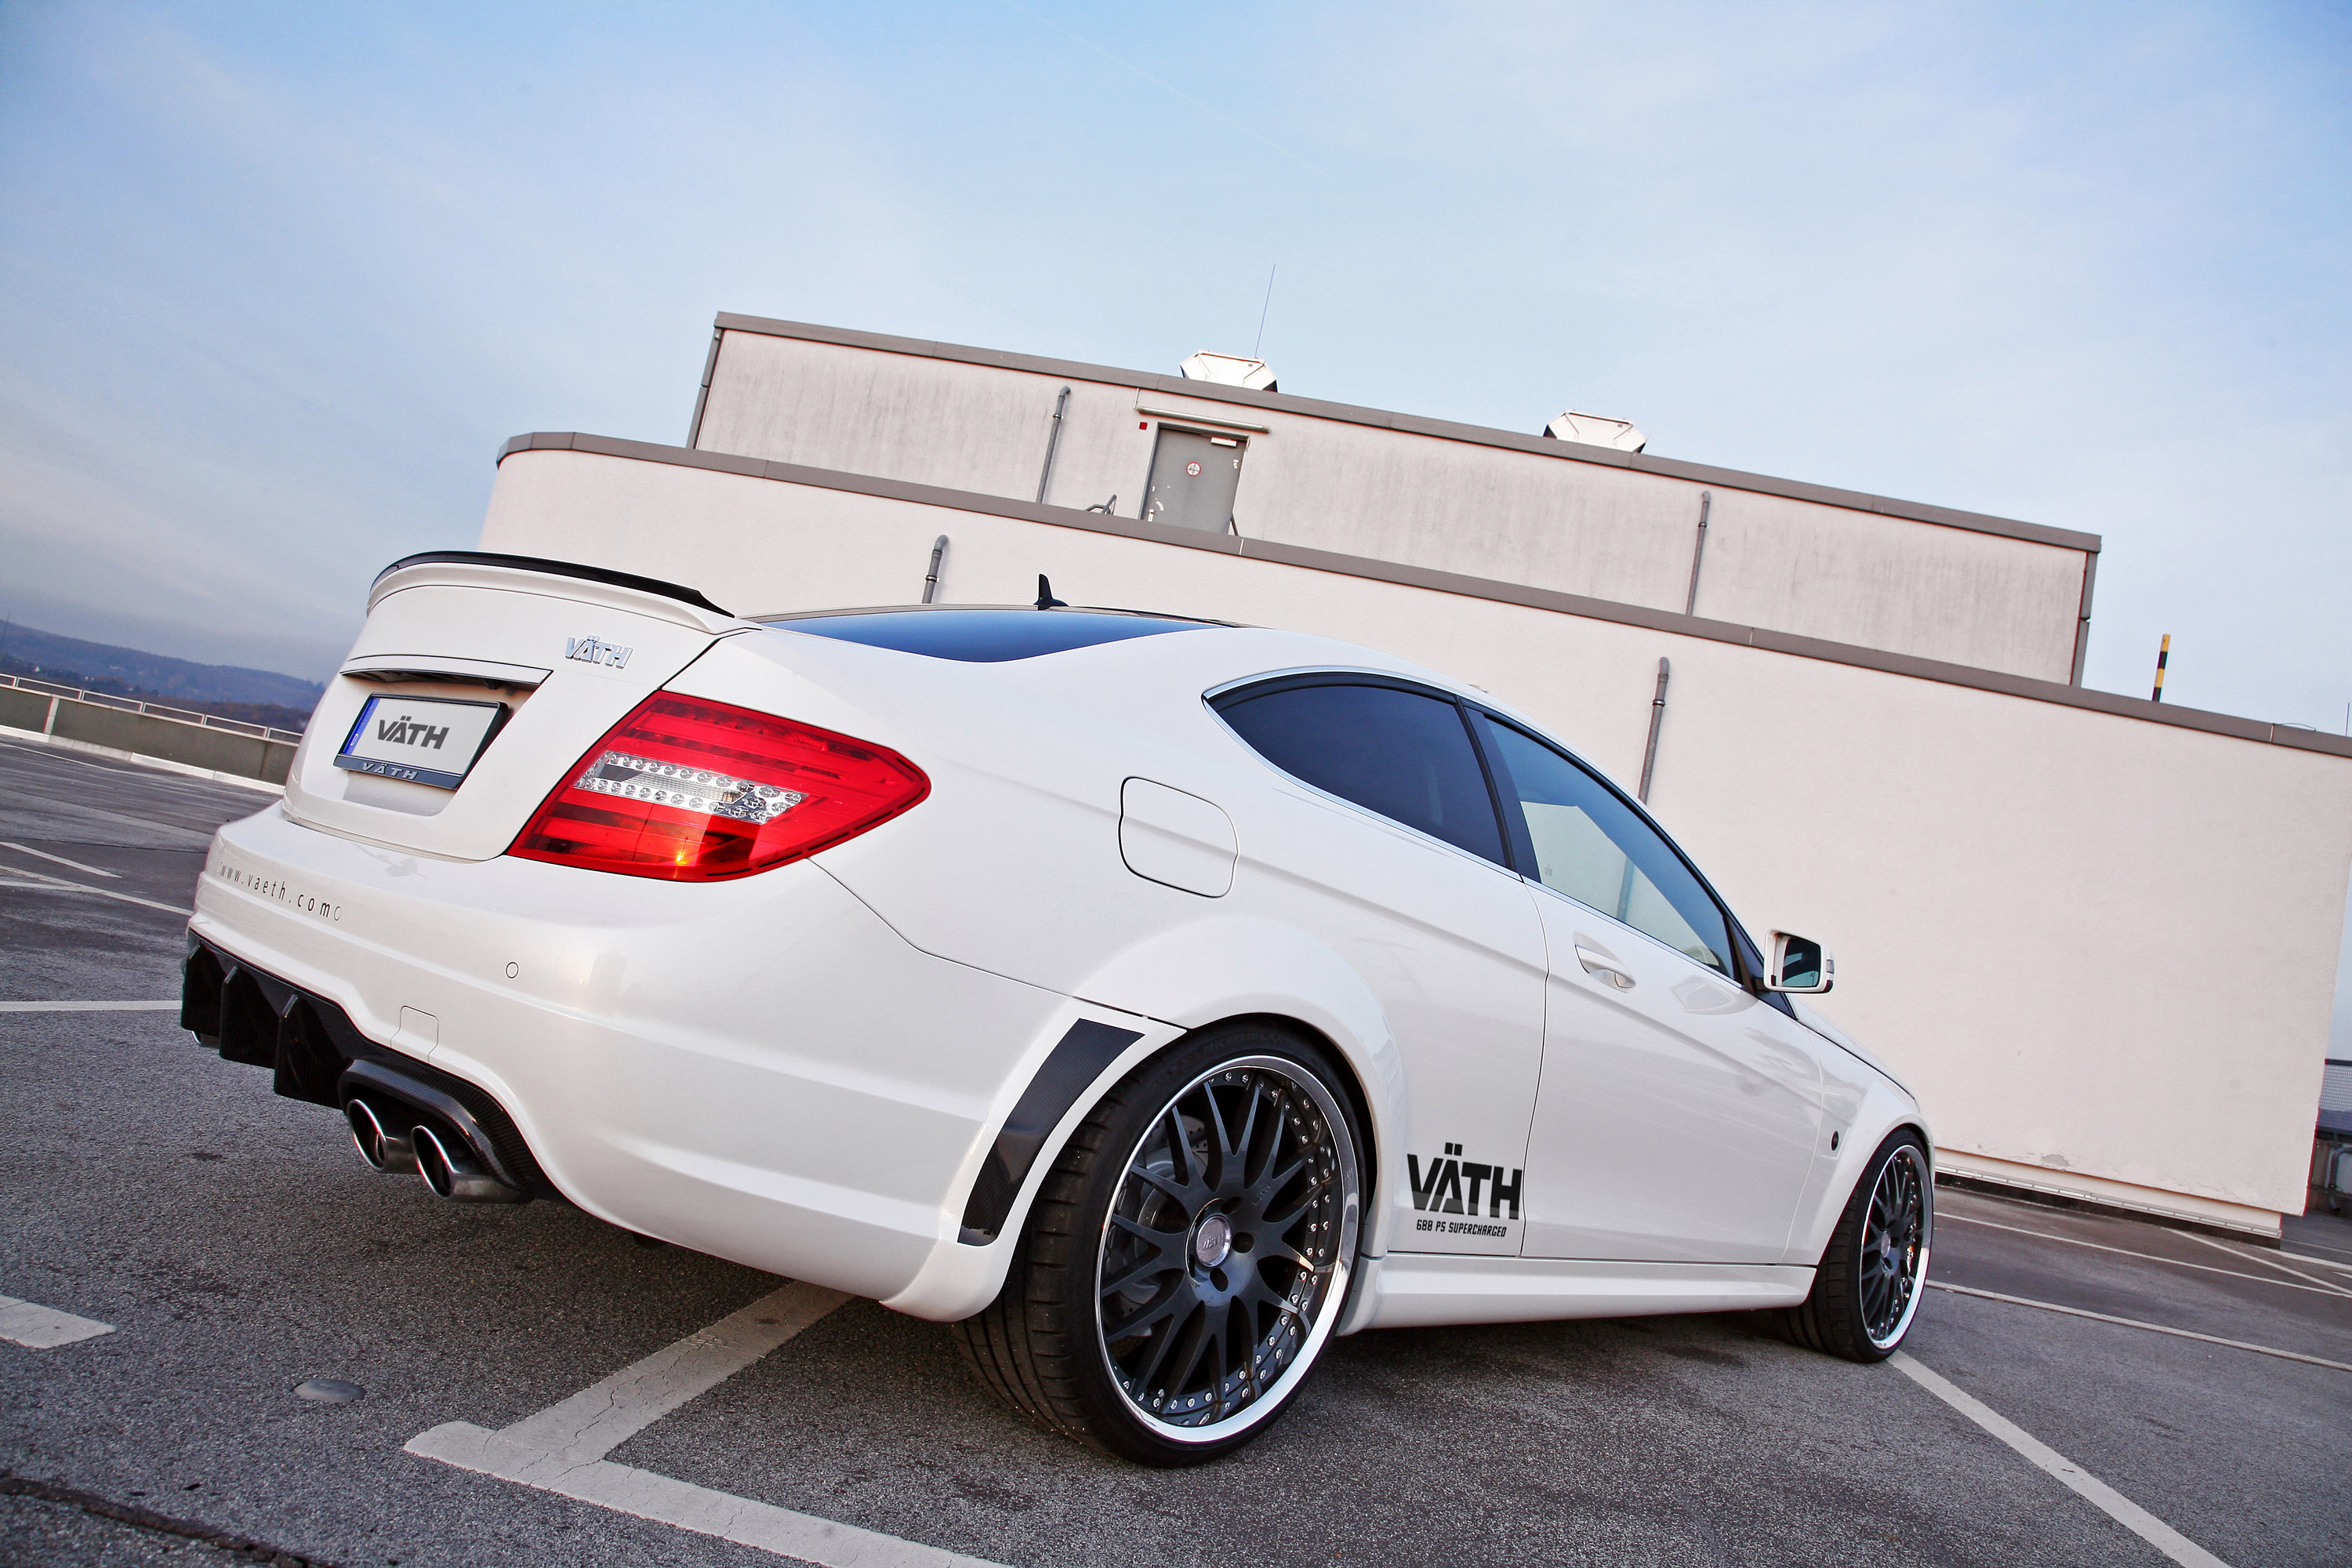 2011, Vath, Mercedes, Benz, V63, Supercharged, Tuning Wallpaper